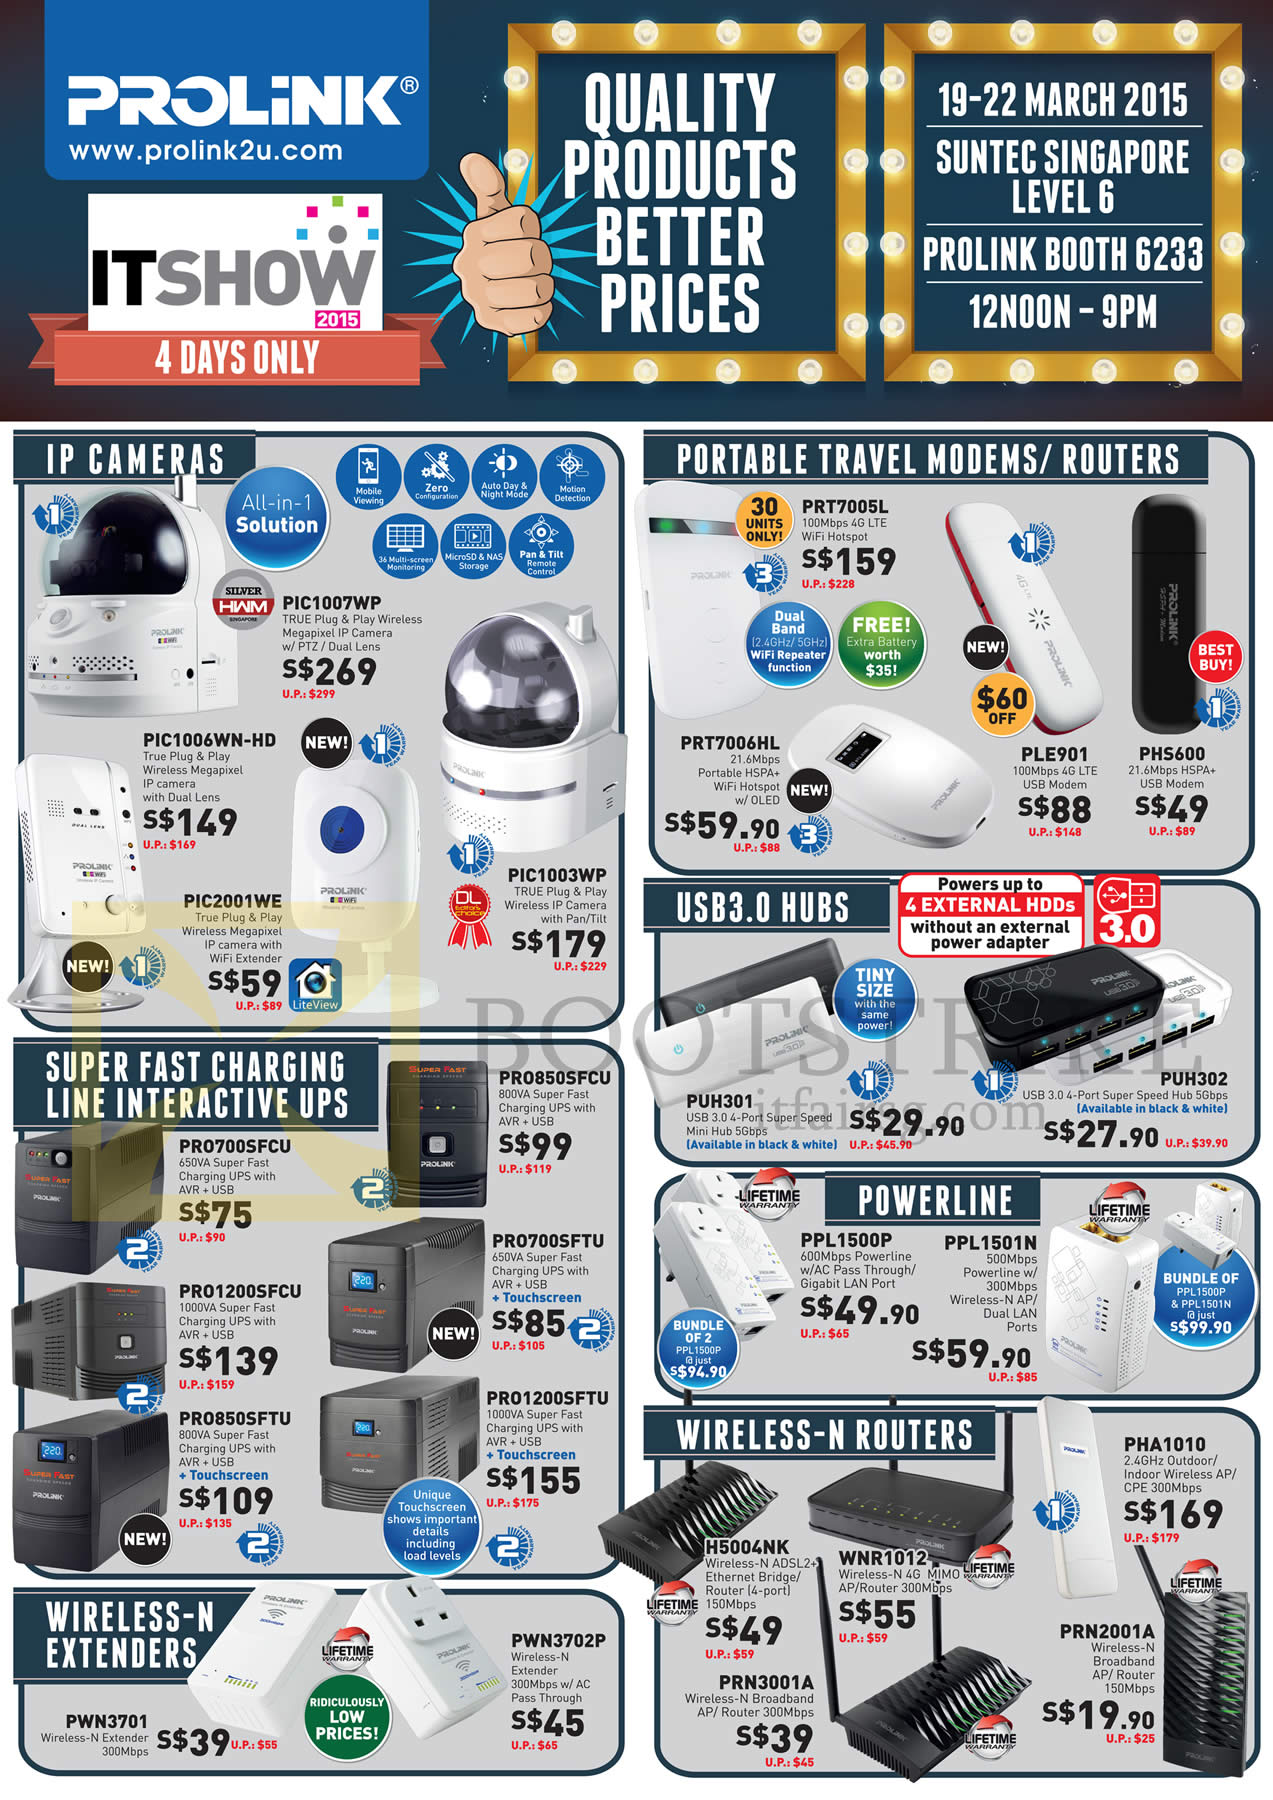 IT SHOW 2015 price list image brochure of Prolink IP Cameras, Portable Travel Modems, Routers, UPS, Wireless N-Extenders, USB 3.0 Hubs, Powerline, Wireless N-Routers